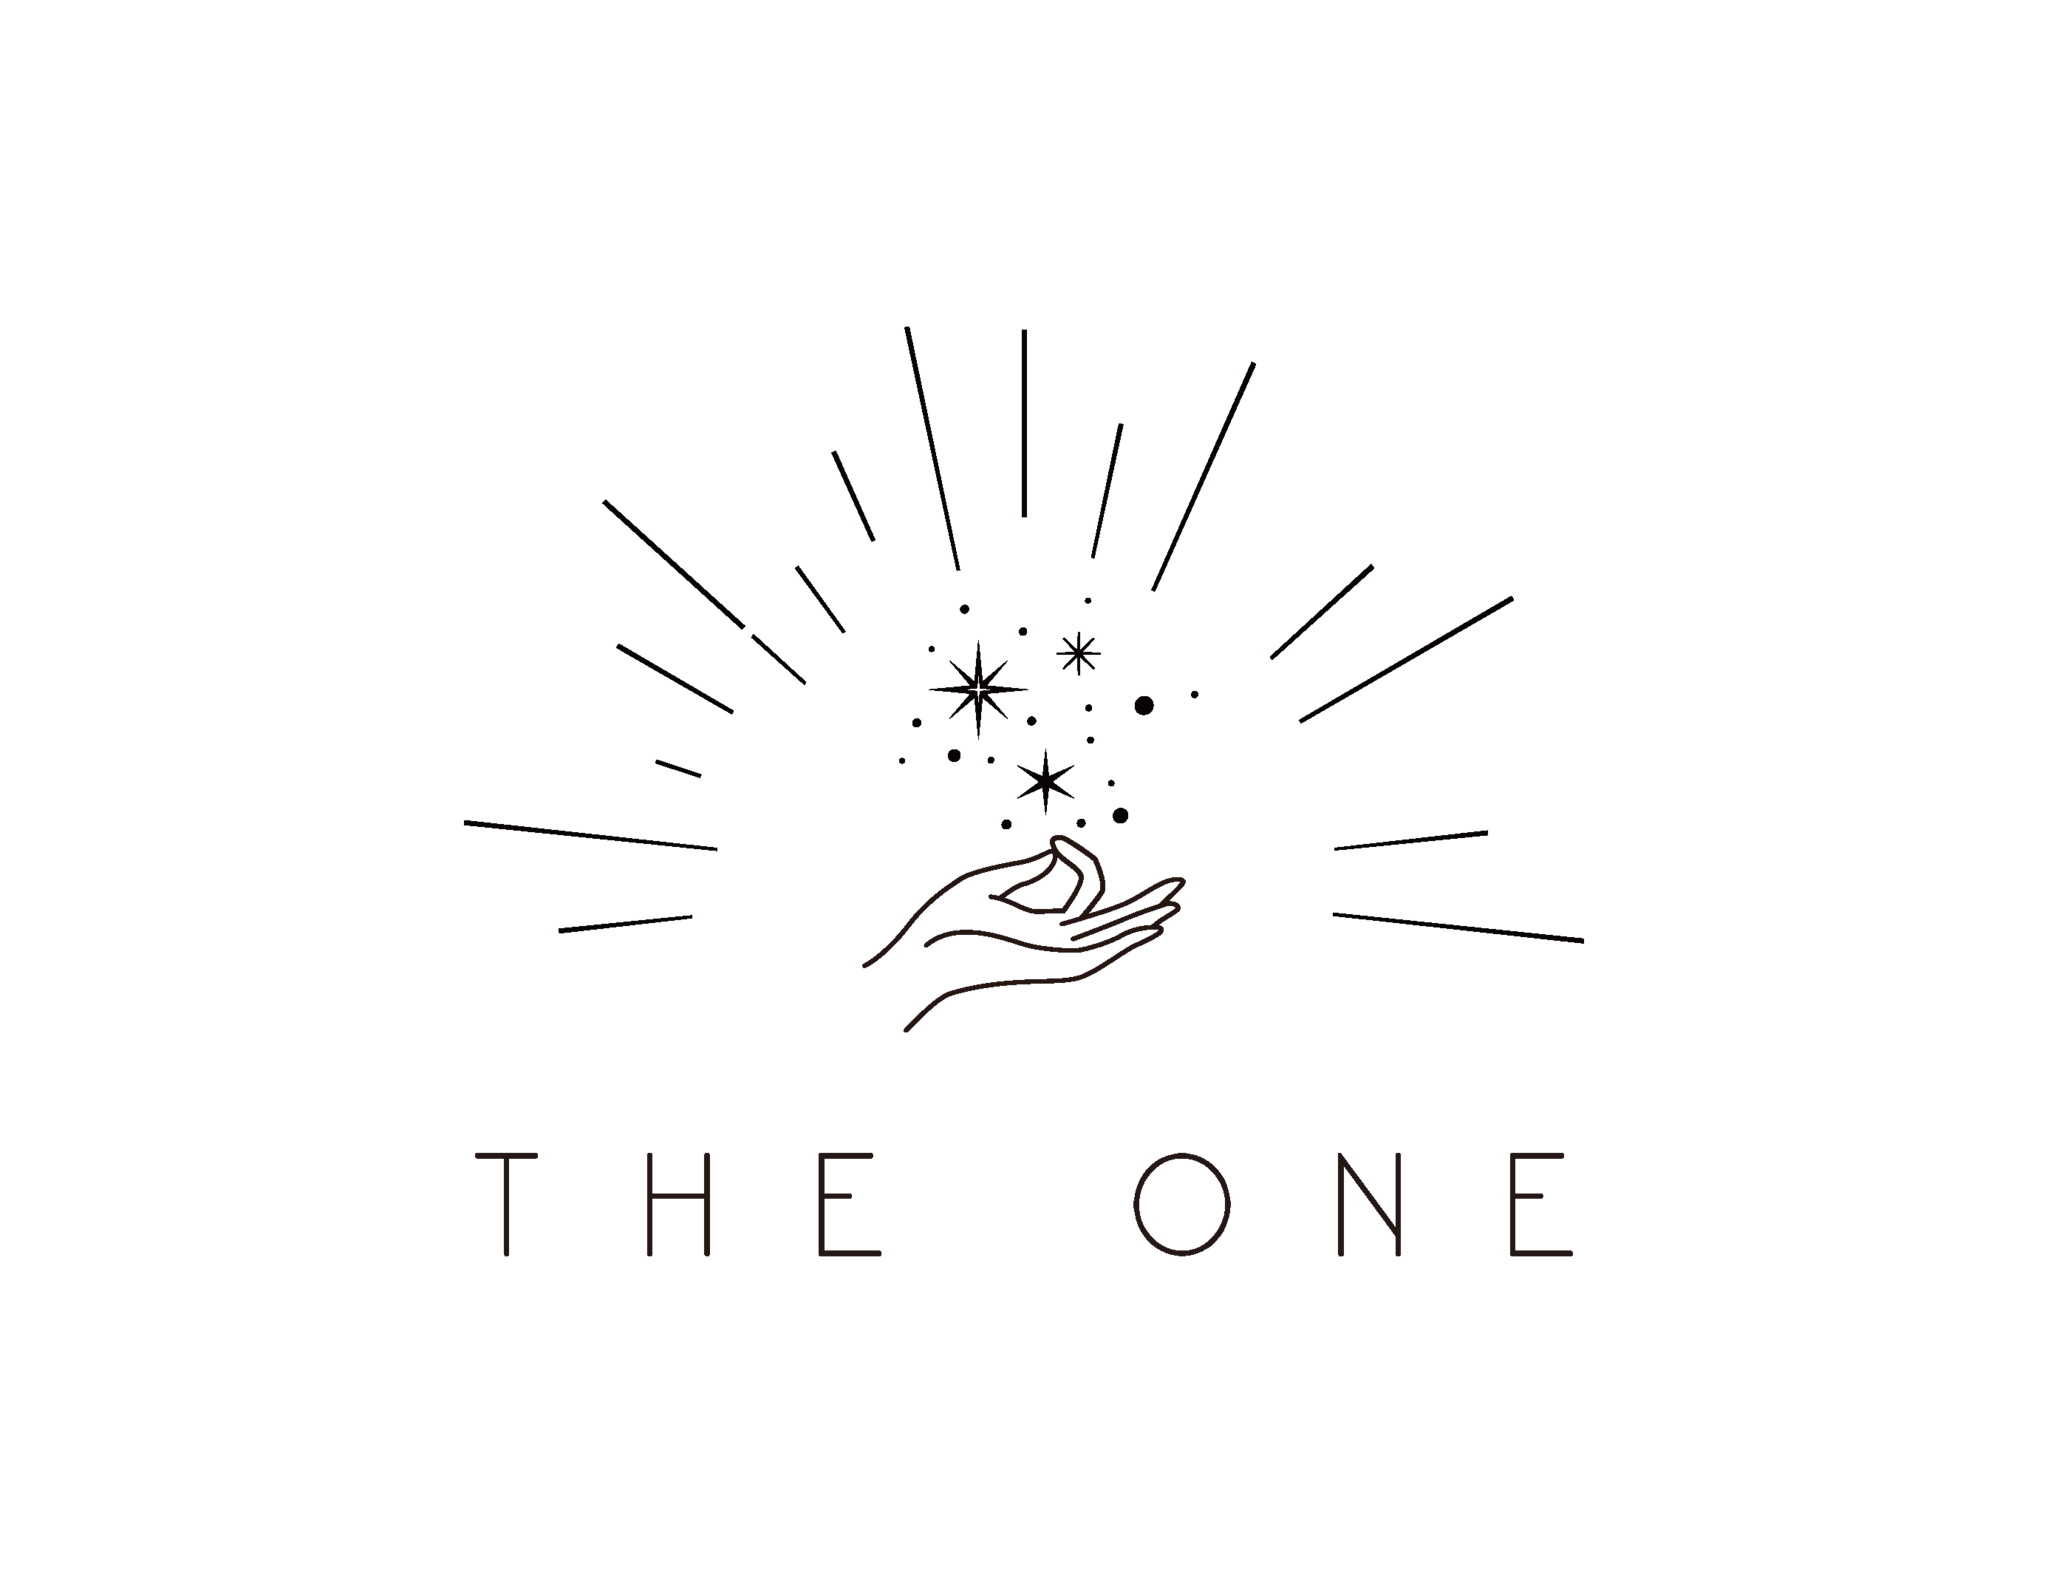 THE ONE｜For International Shipping Only